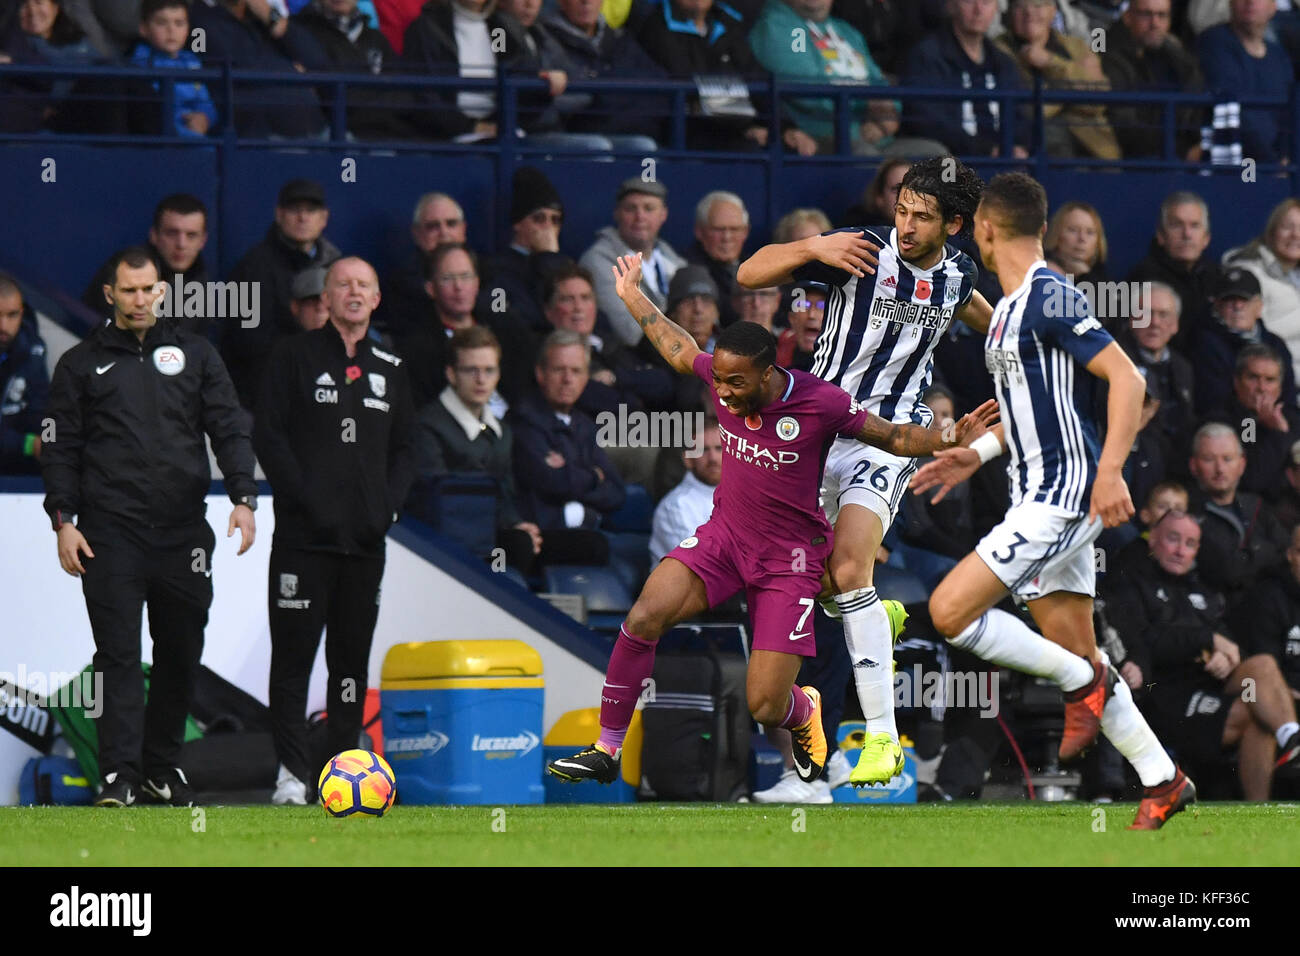 Manchester City's Raheem Sterling (left) and West Bromwich Albion's Ahmed Hegazy battle for the ball during the Premier League match at The Hawthorns, West Bromwich. Stock Photo